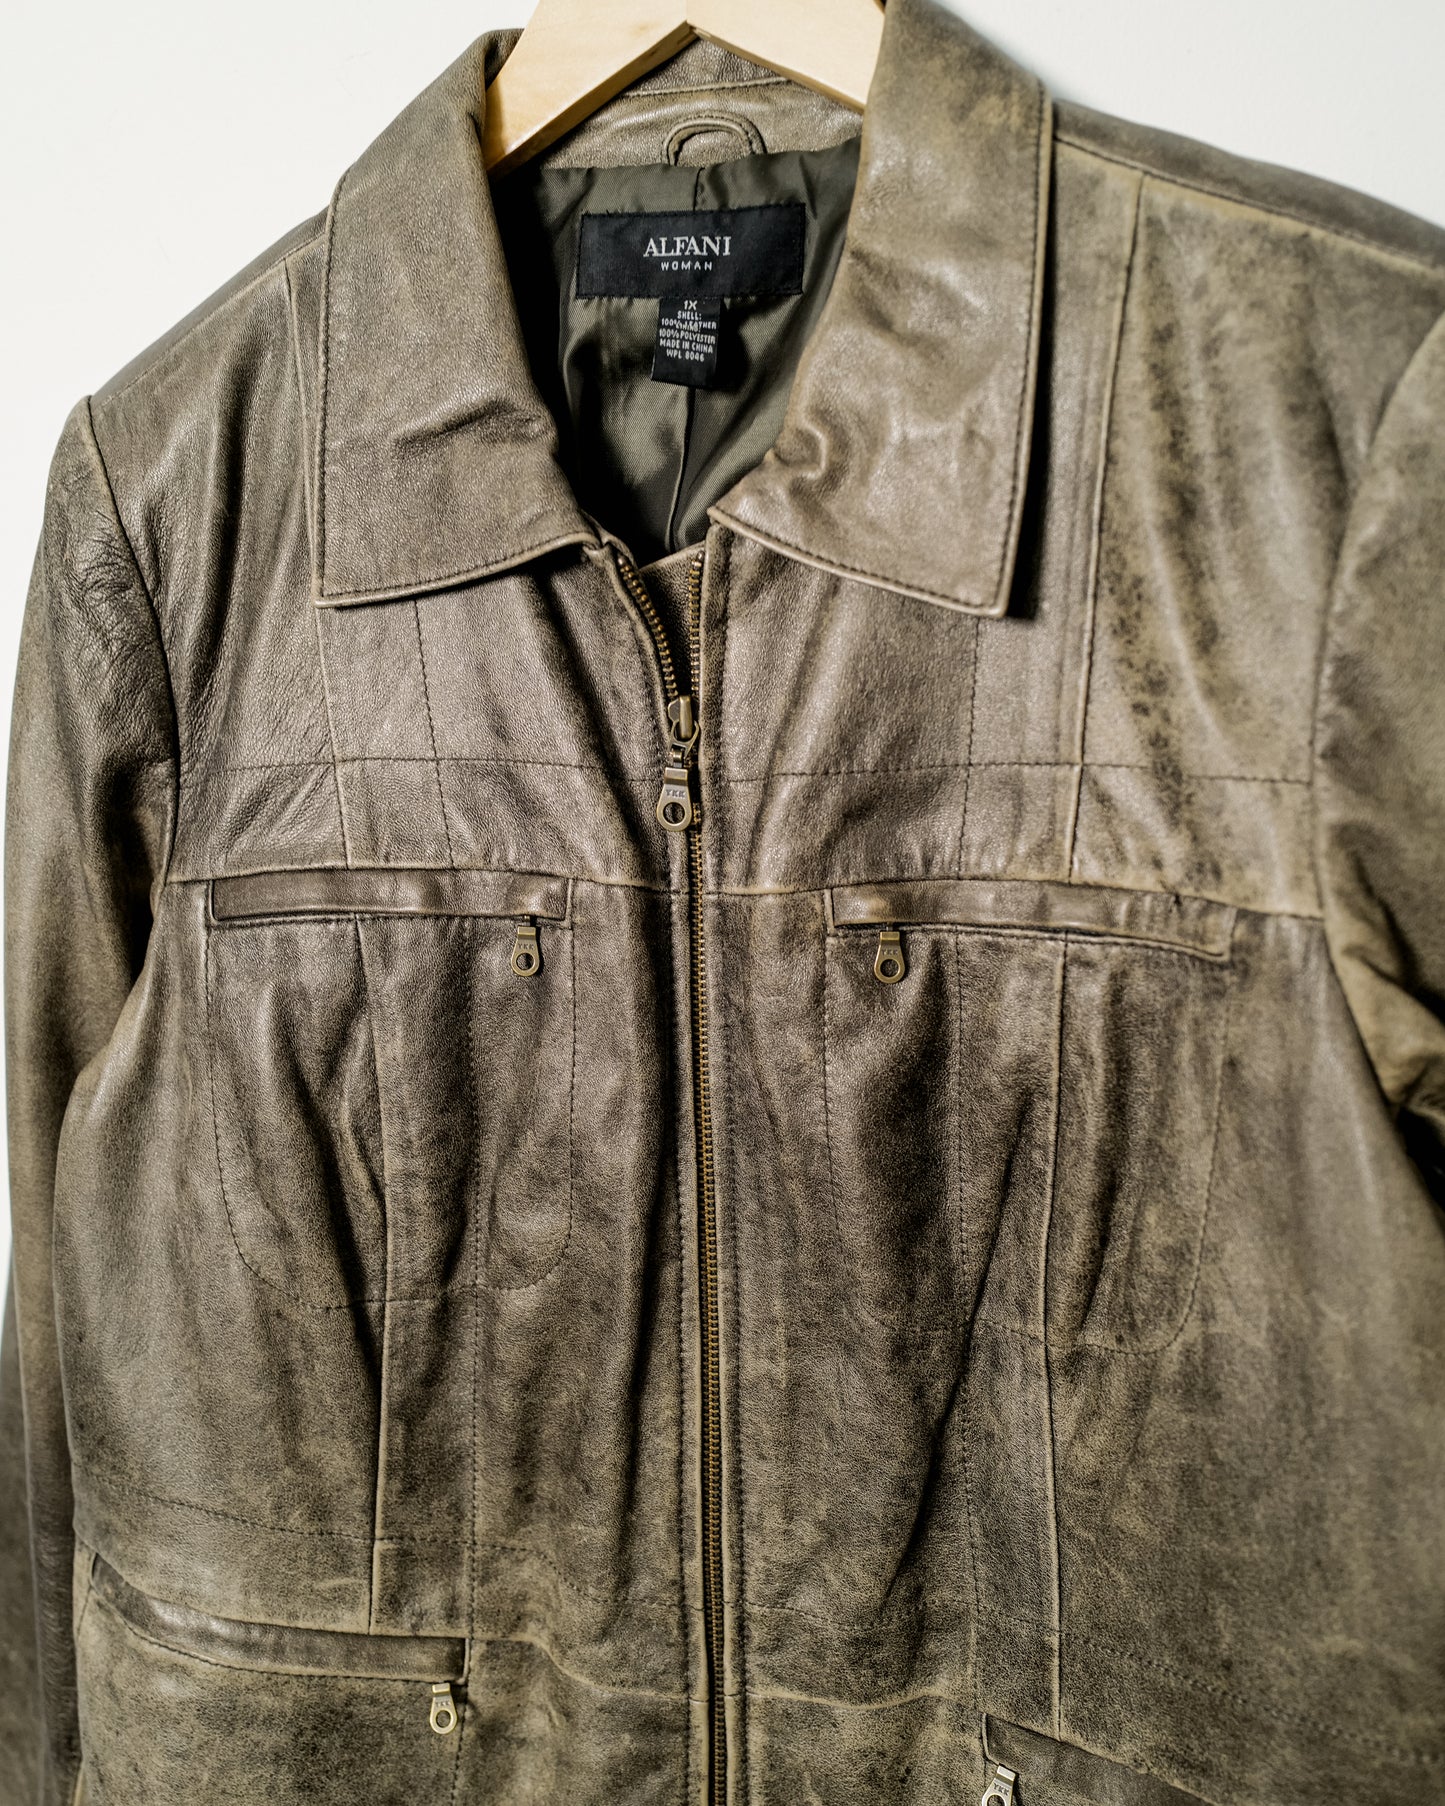 Distressed Leather Jacket - Size XL